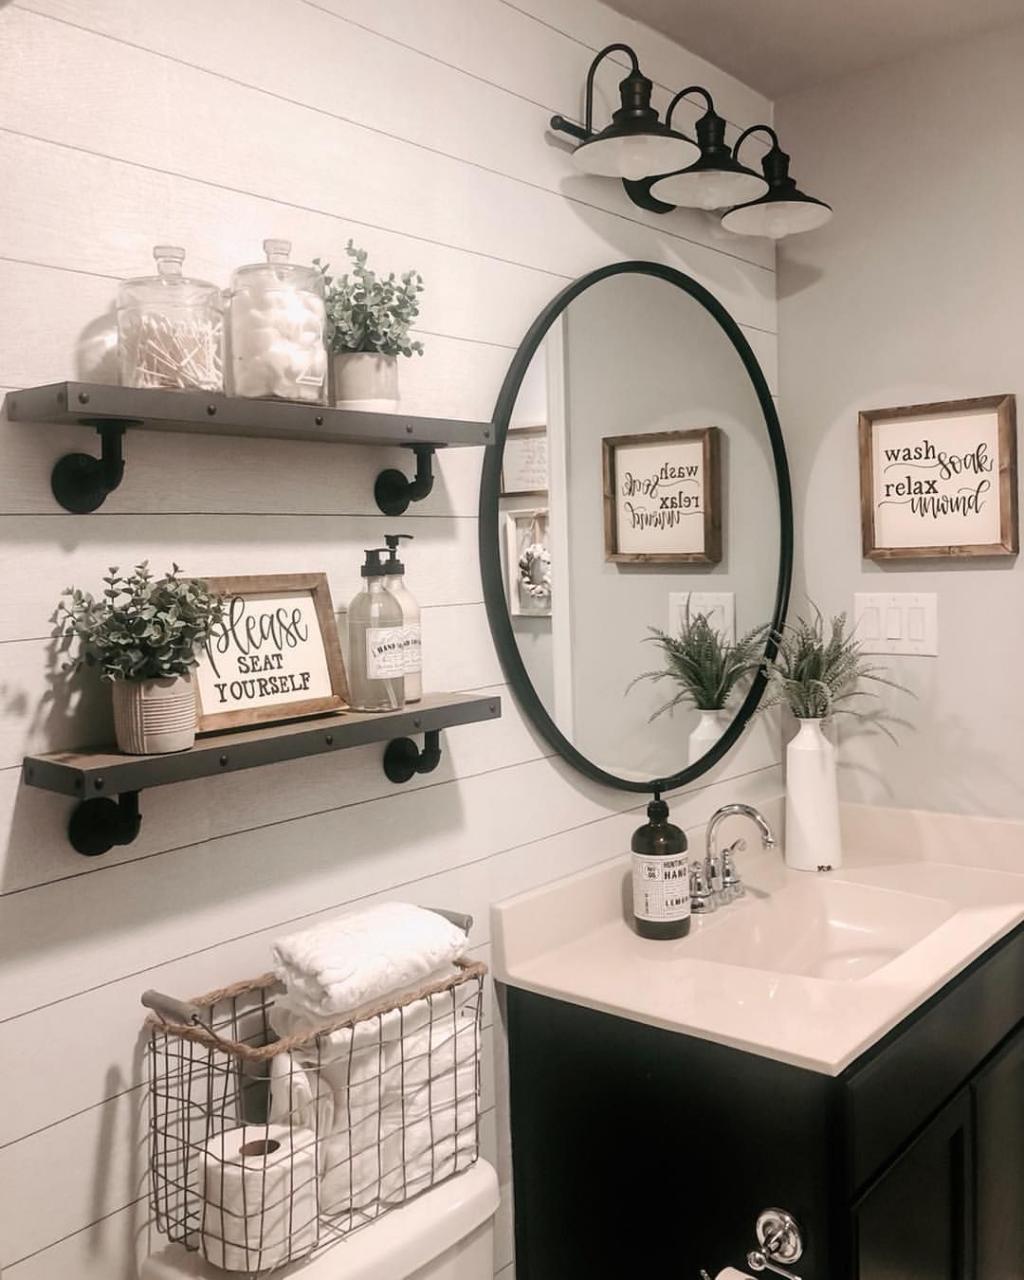 Guest bathroom reveal!! My husband and I have been working on our guest